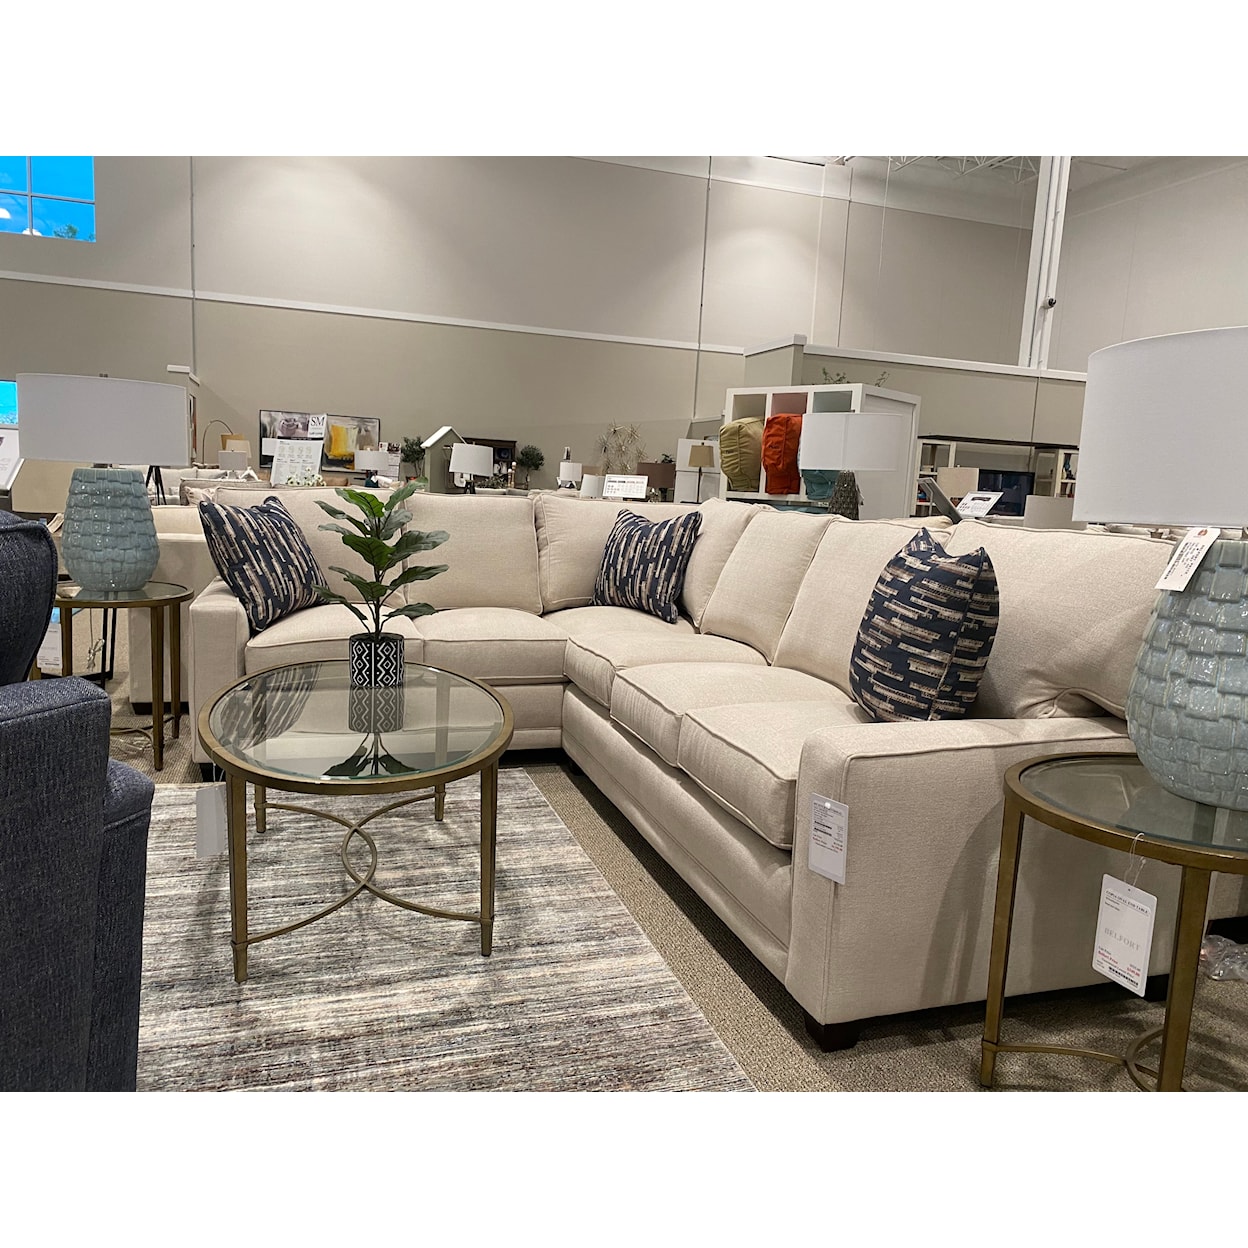 Rowe My Style I Sectional